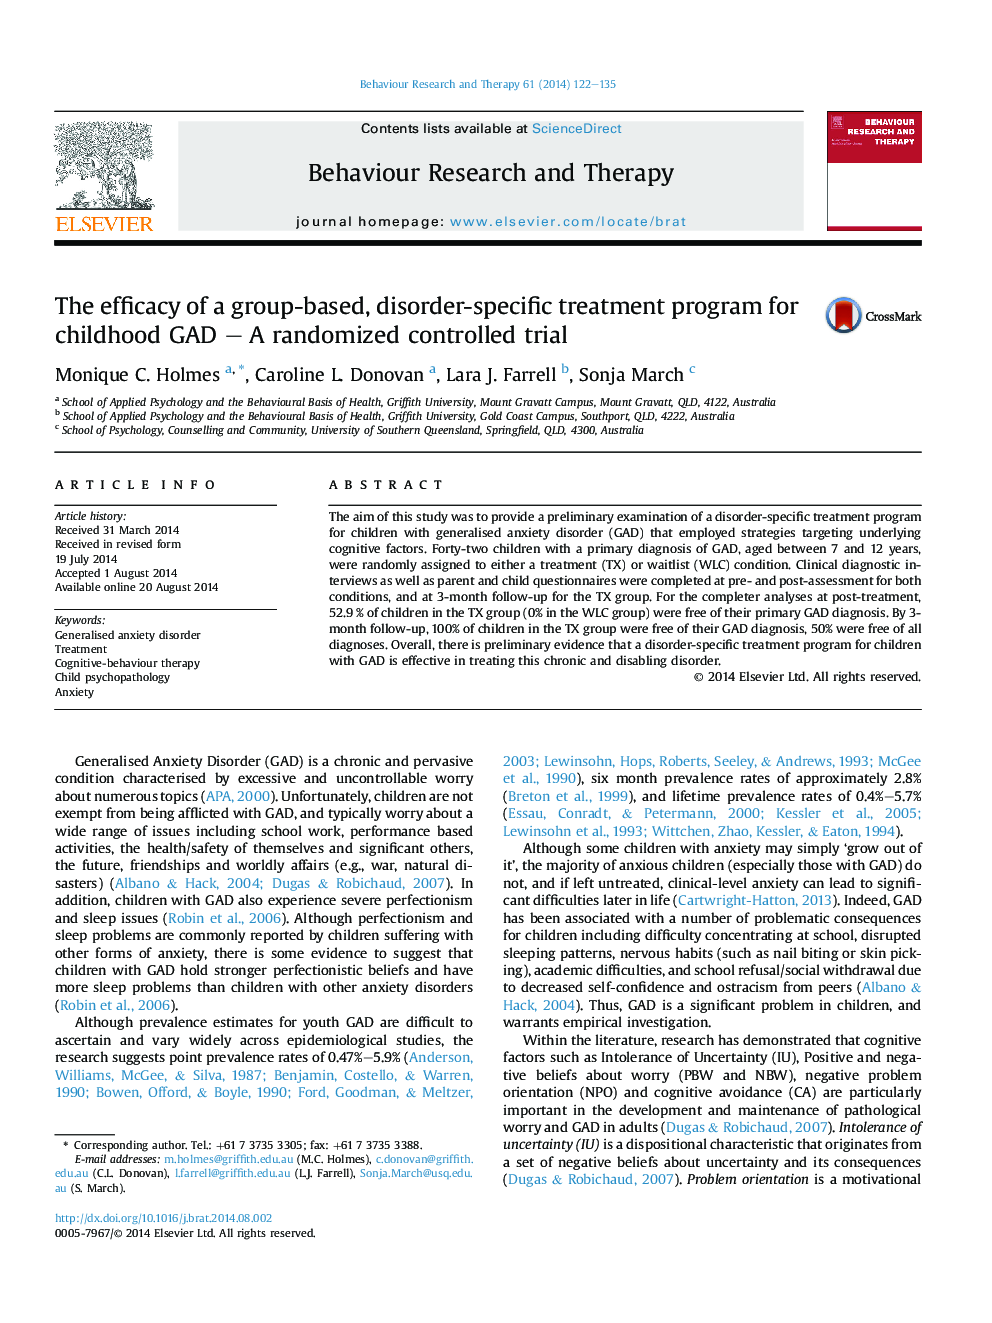 The efficacy of a group-based, disorder-specific treatment program for childhood GAD – A randomized controlled trial